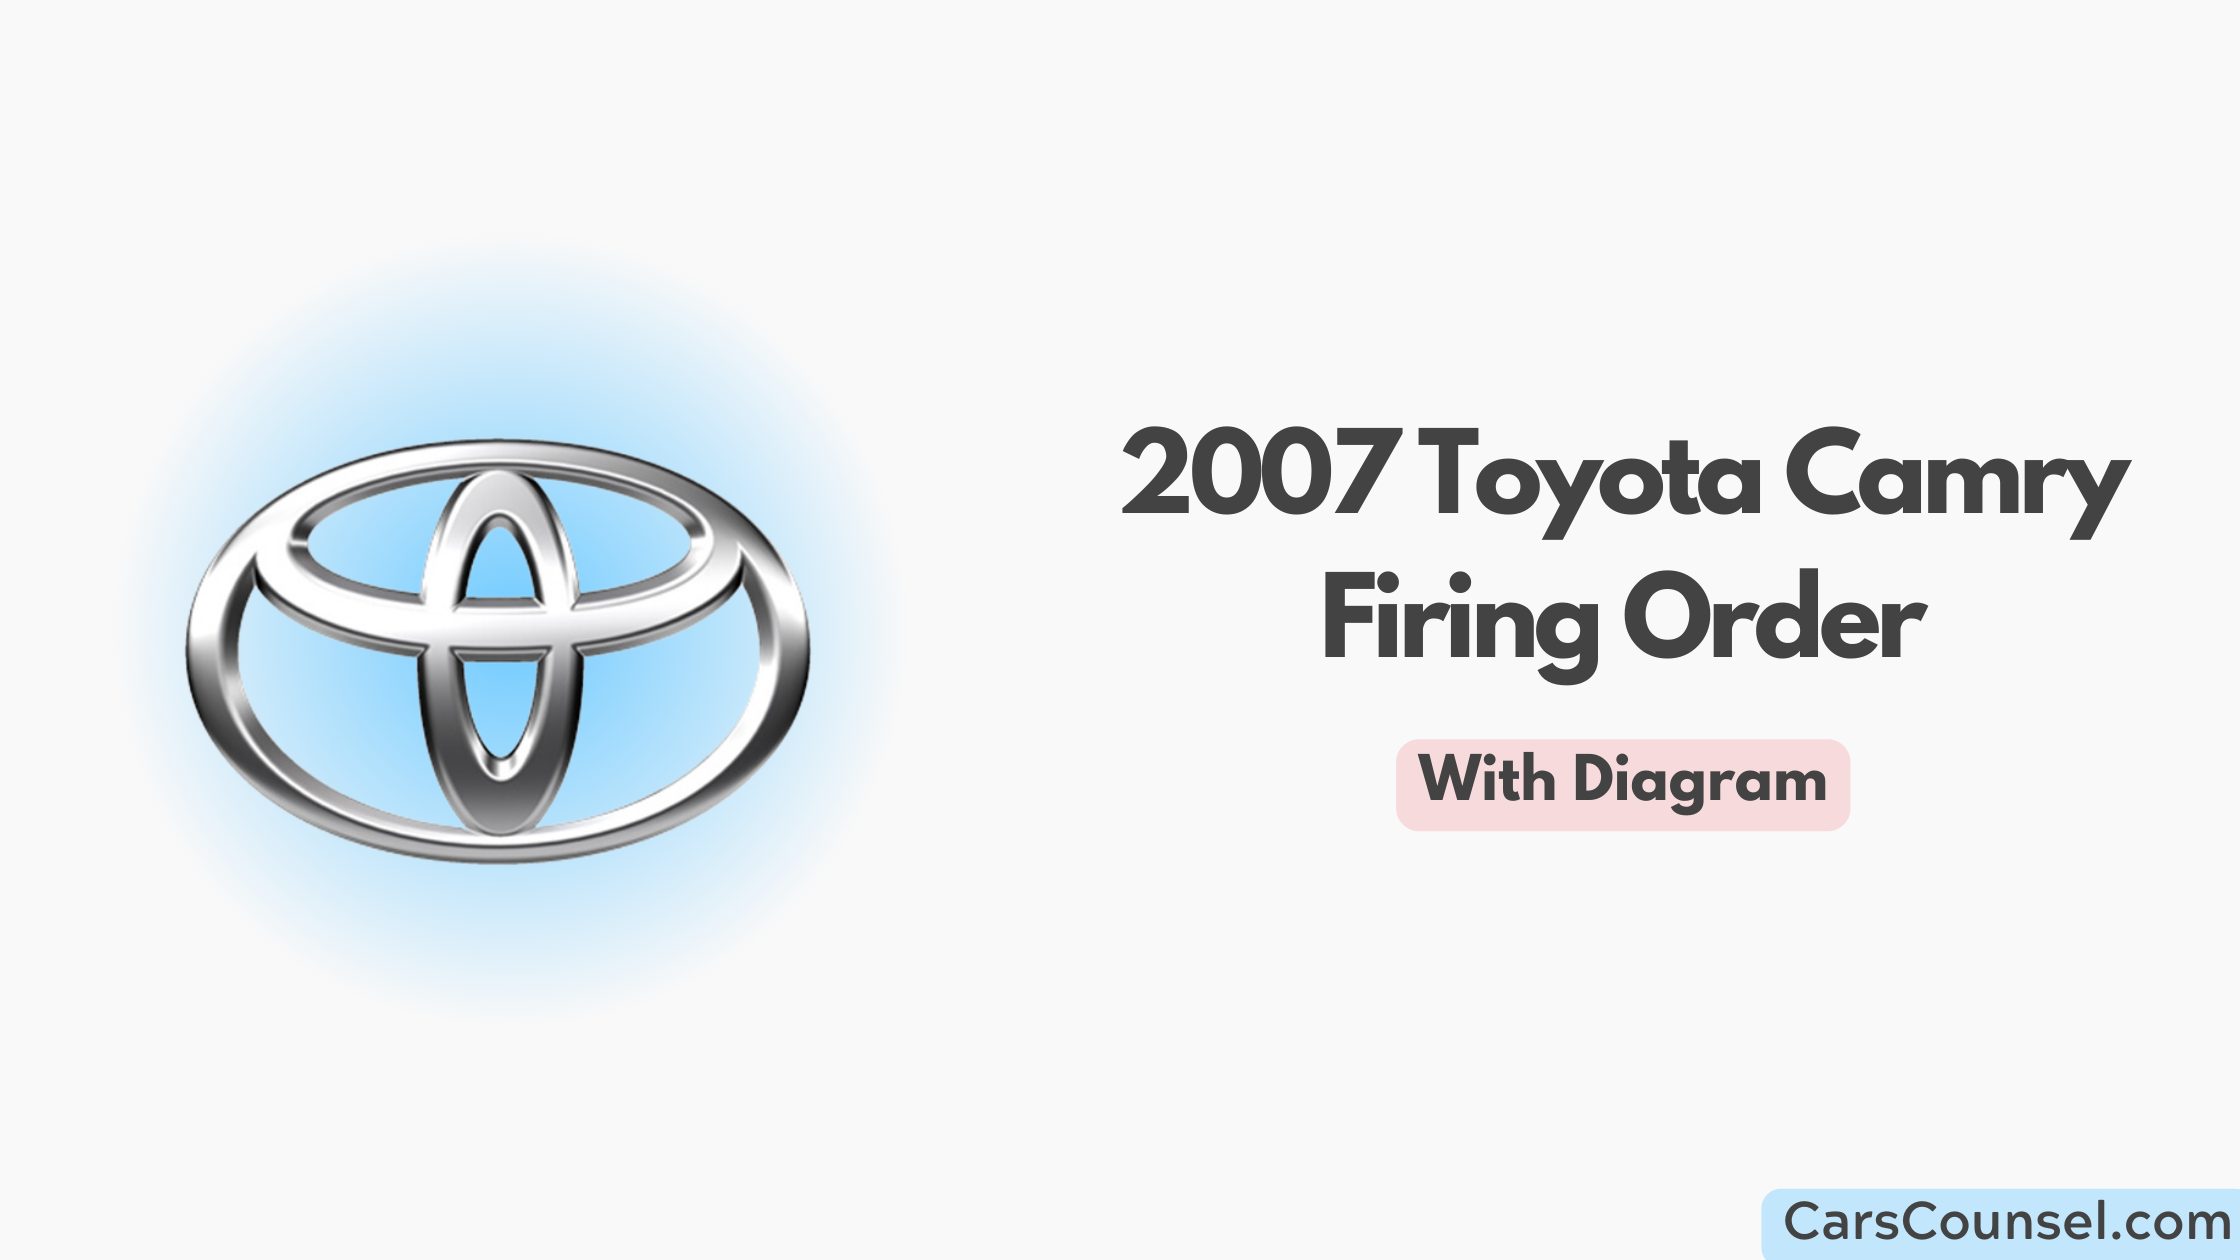 2007 Toyota Camry Firing Order With Diagram